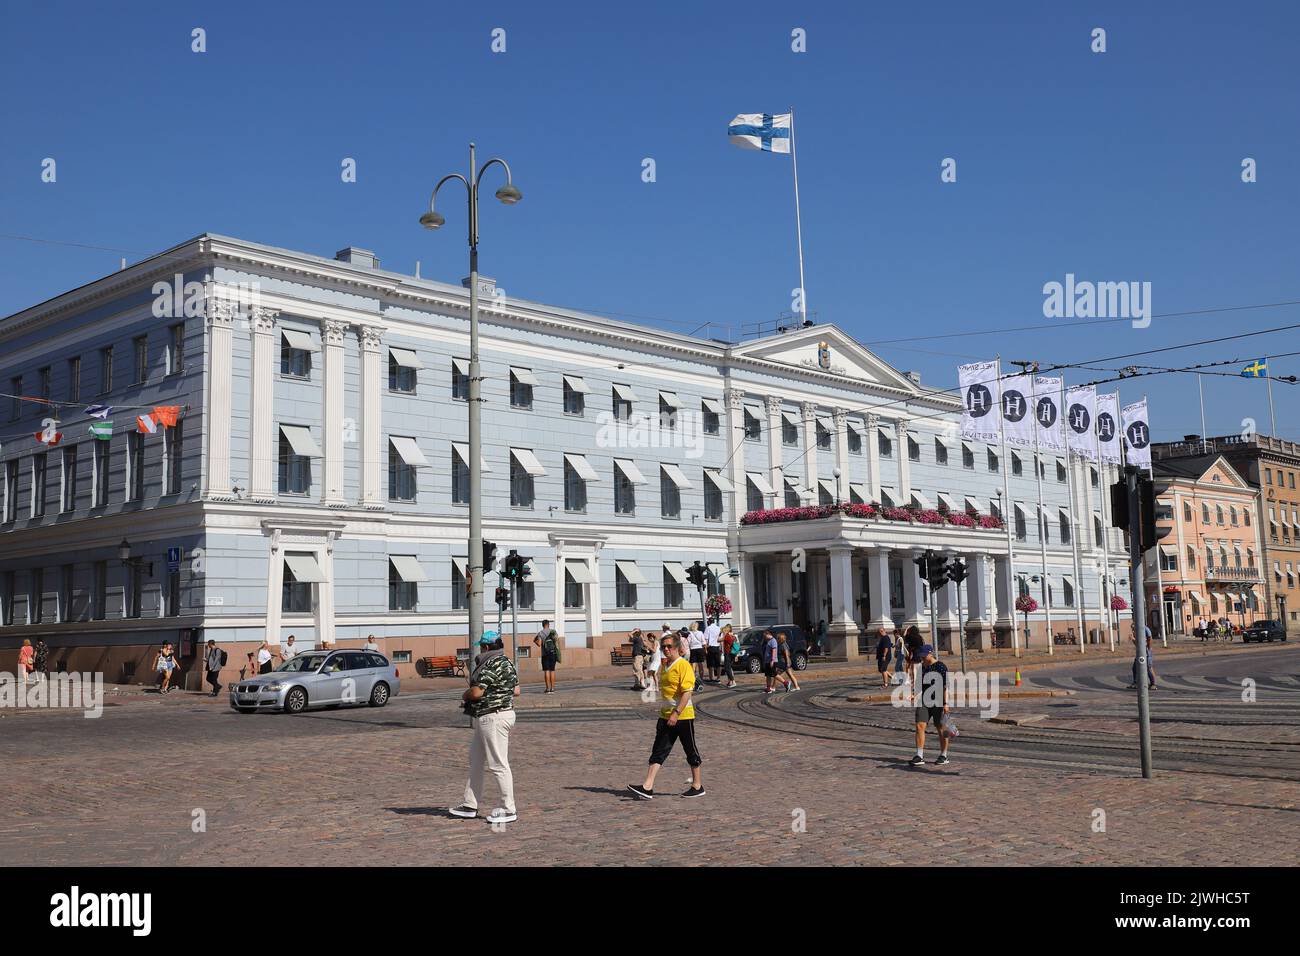 Helsinki, Finland - August 20, 2022: The Helsinki city hall building located at the Salutorget market square. Stock Photo